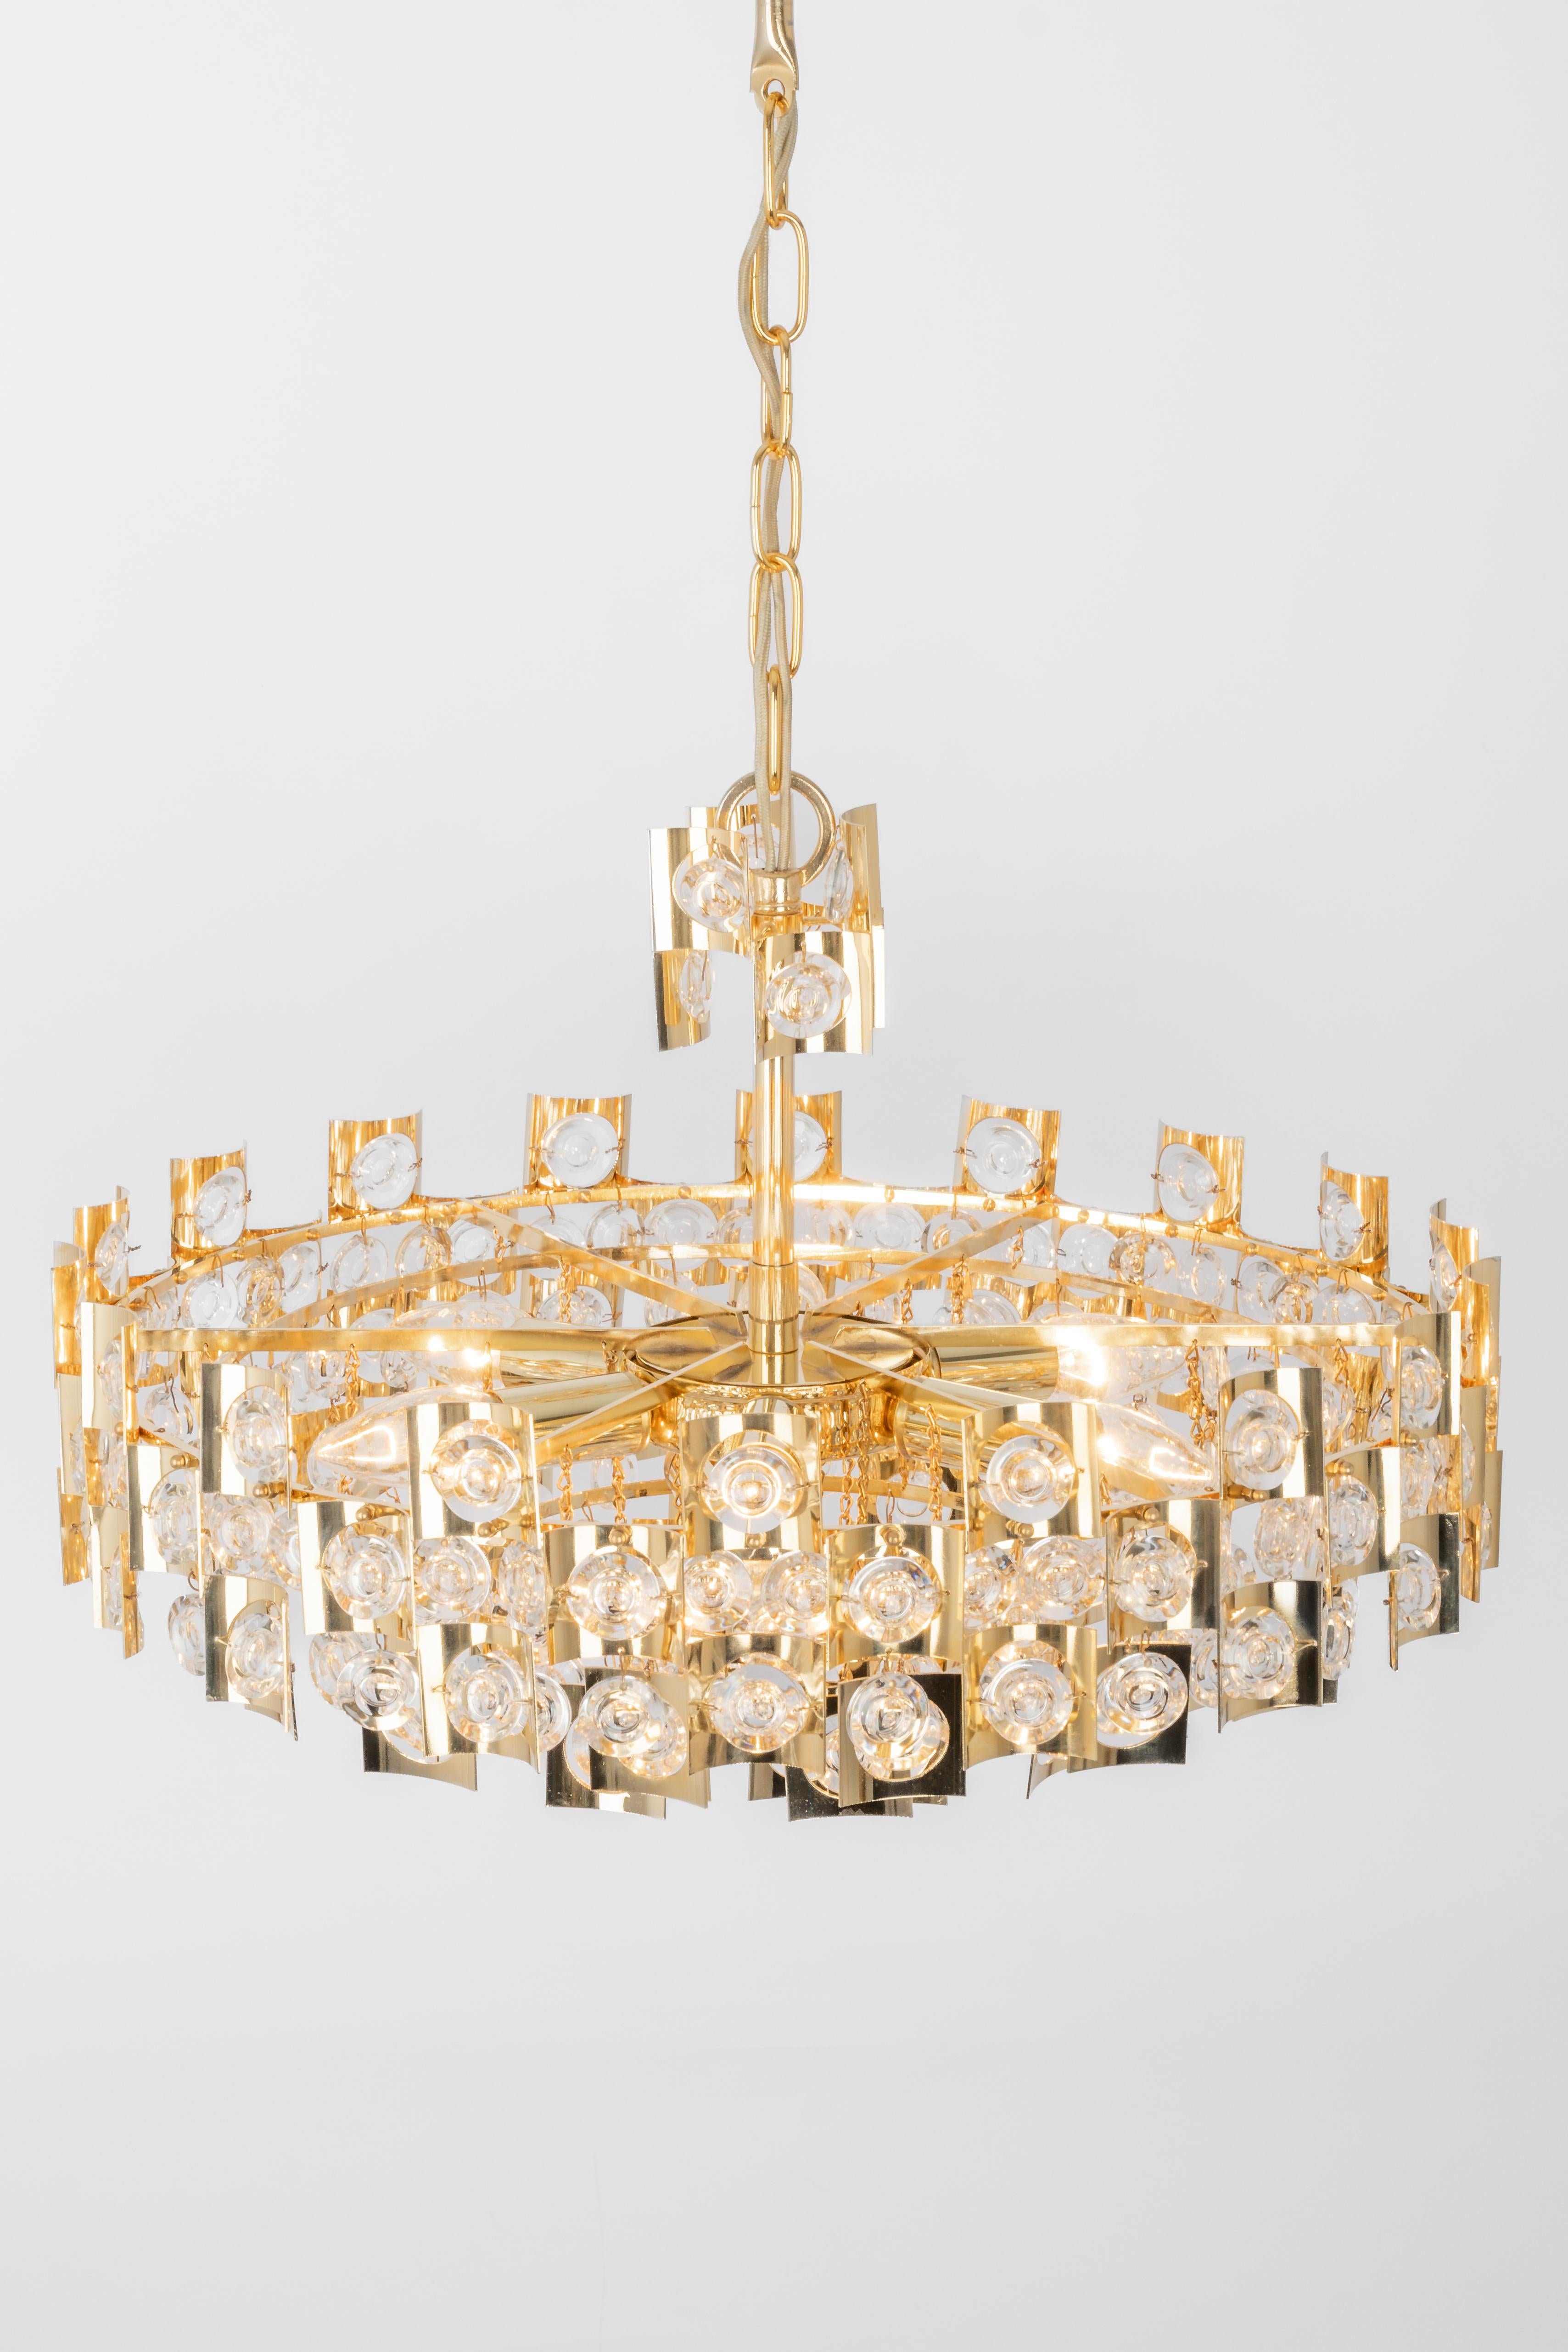 Impressive Large Gilt Brass and Crystal Glass Chandelier by Palwa Germany, 1960s For Sale 3